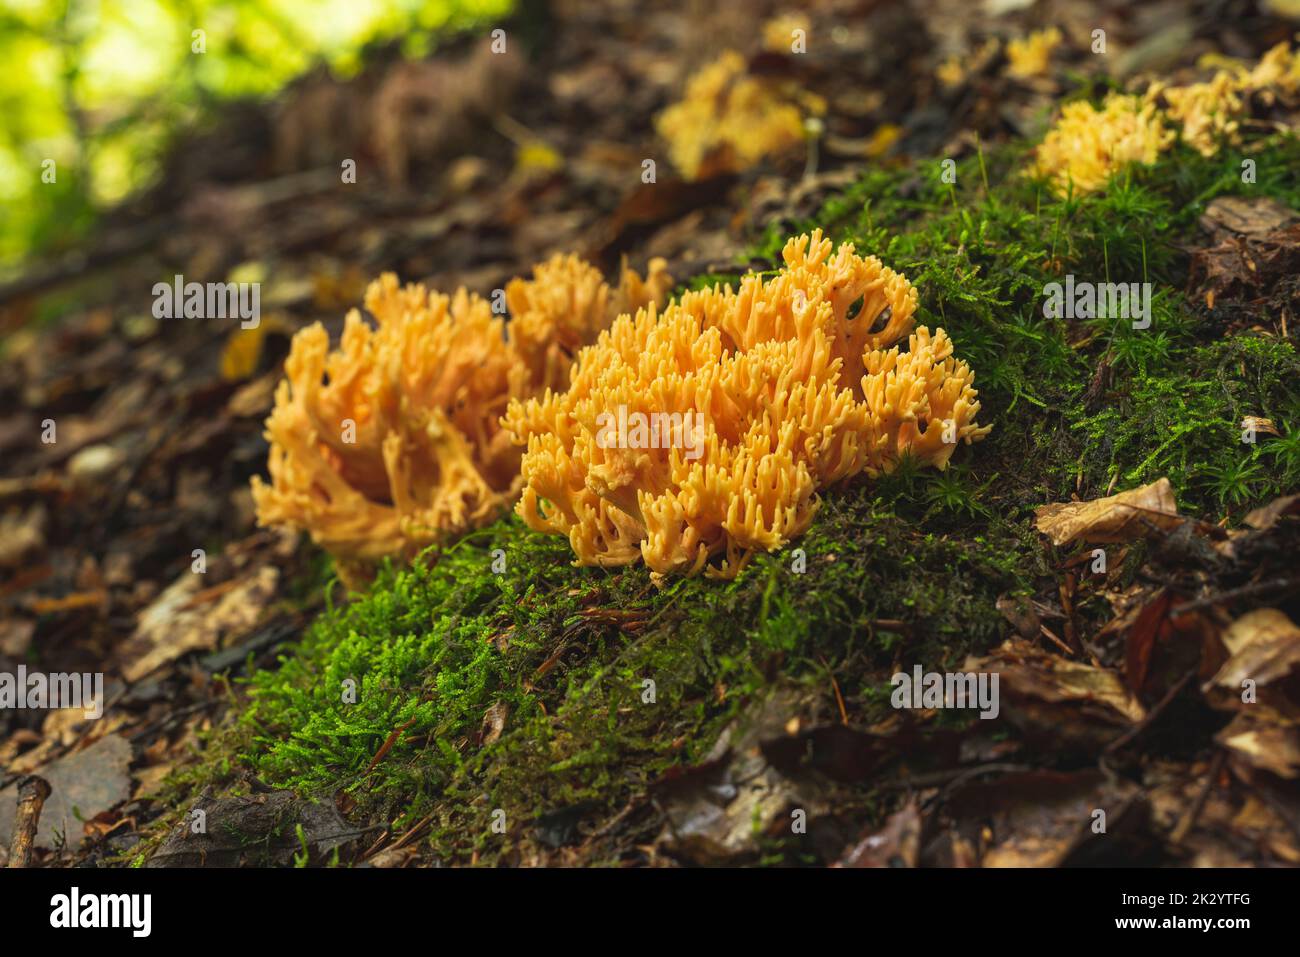 Yellow coral mushroom growing on the forest floor in early autumn Stock Photo